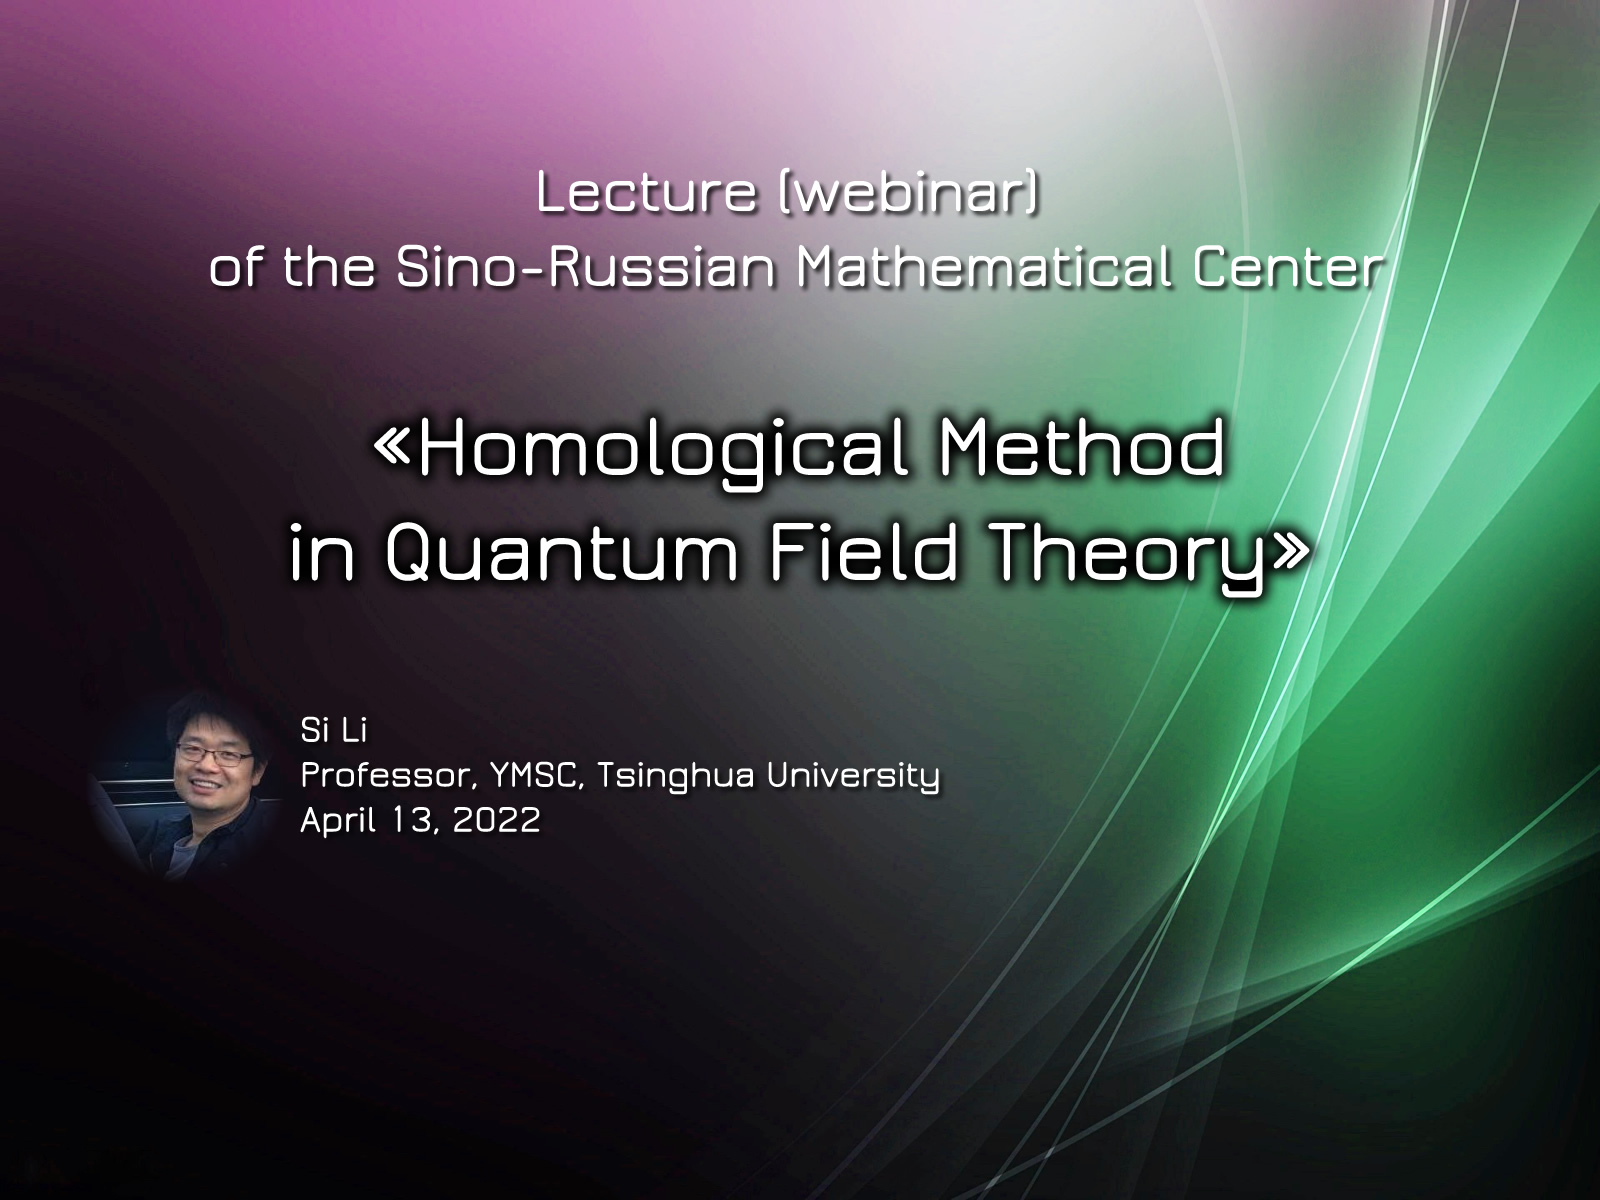 «Homological Method in Quantum Field Theory» 13.04.2022